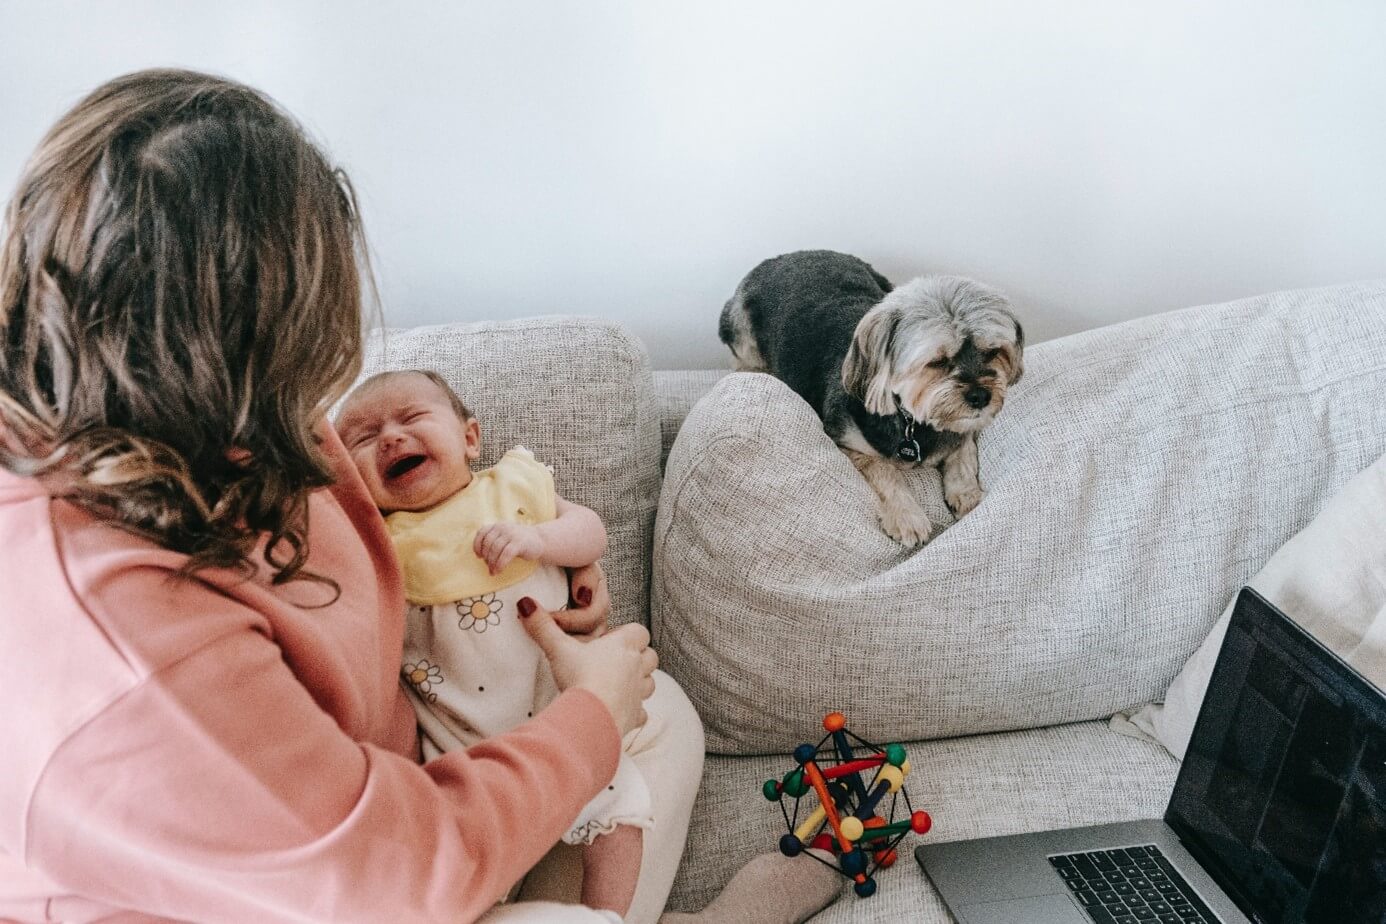 A woman looking at a crying baby in her arms and a dog next to them looking a bit down